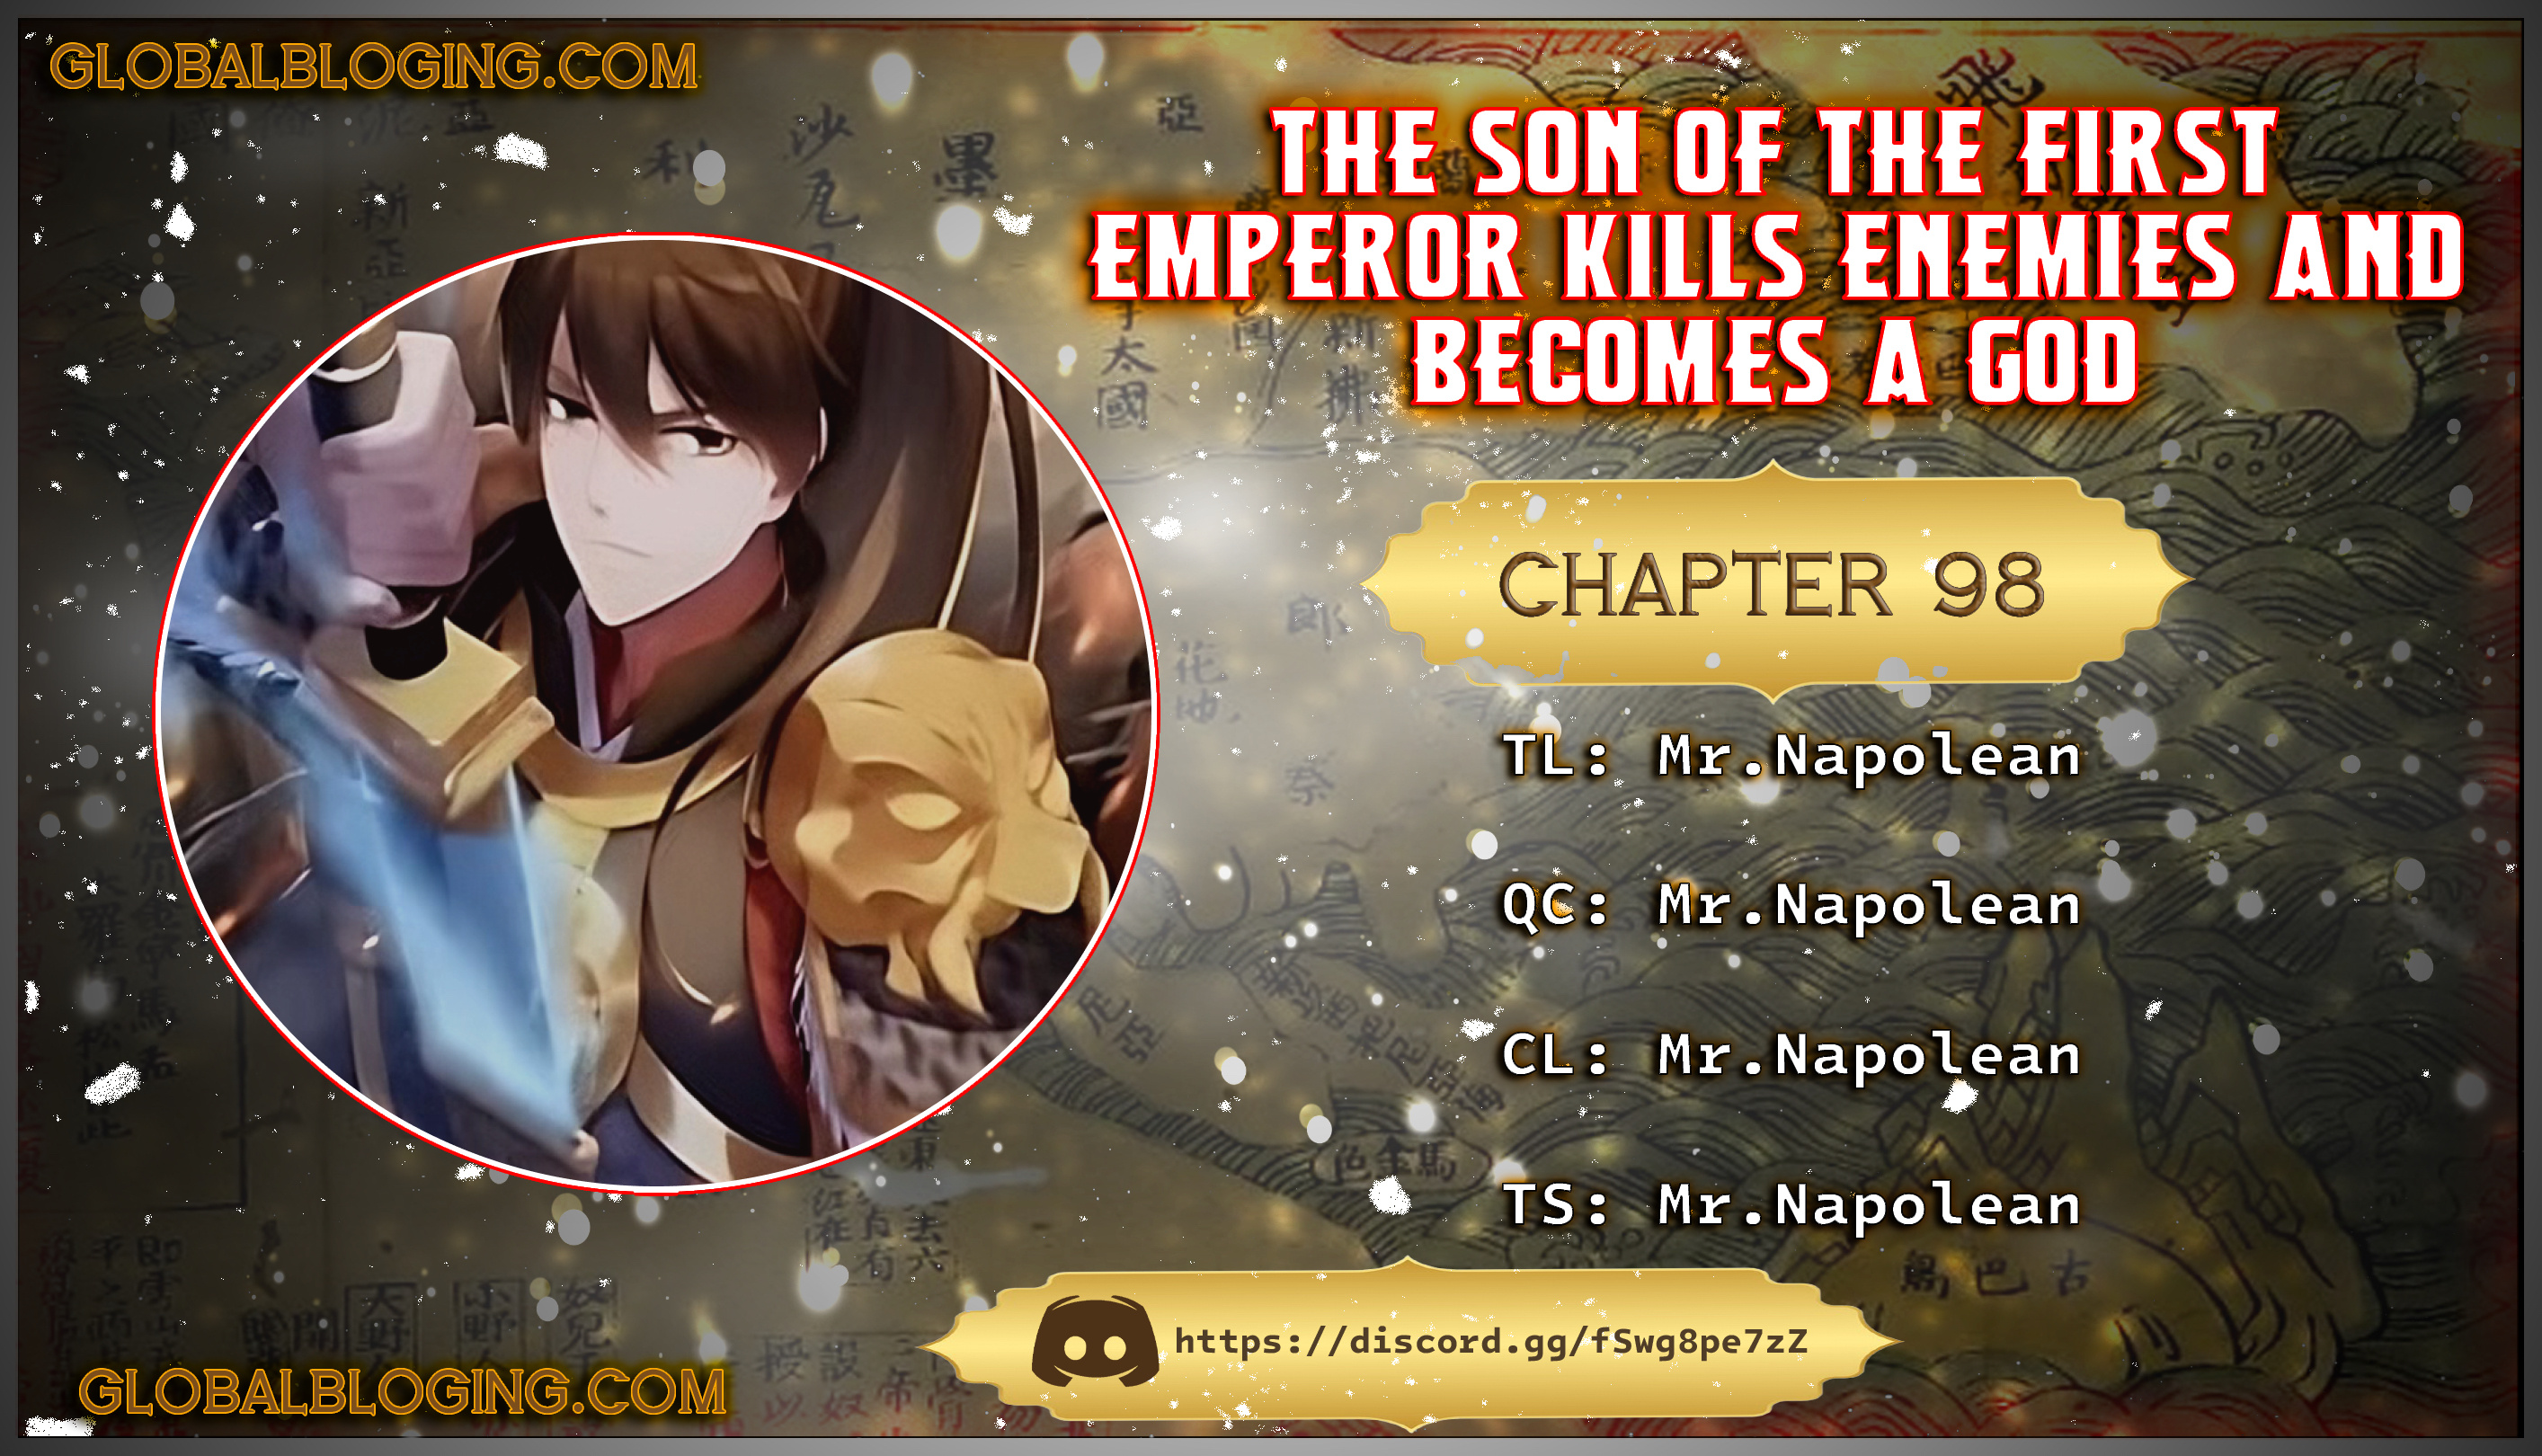 The Son Of The First Emperor Kills Enemies And Becomes A God - Page 1